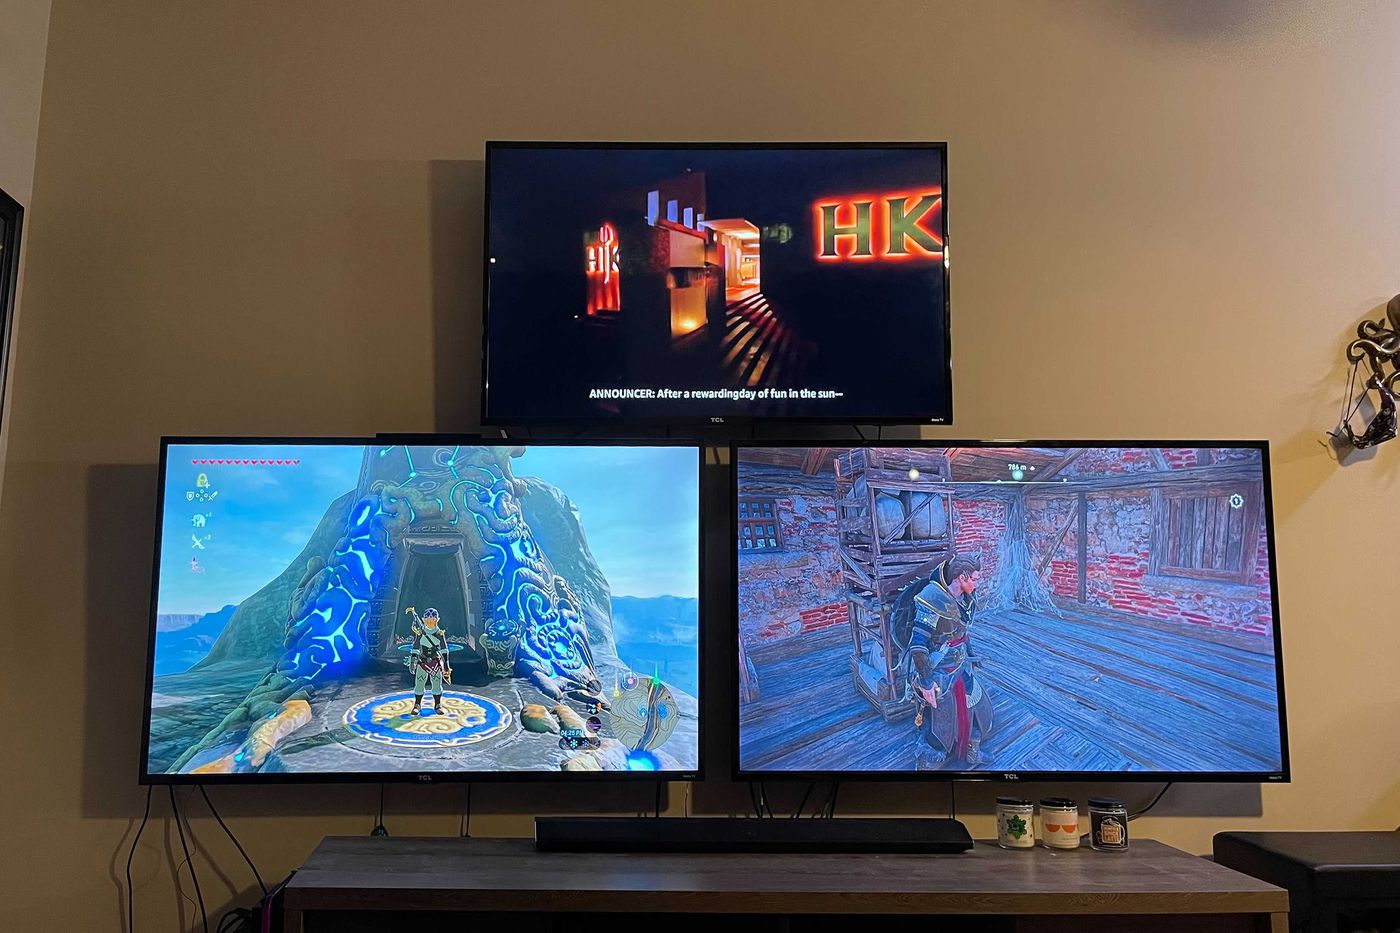 Im Officially Not The Only One With Three Tvs In My Living Room - Polygon